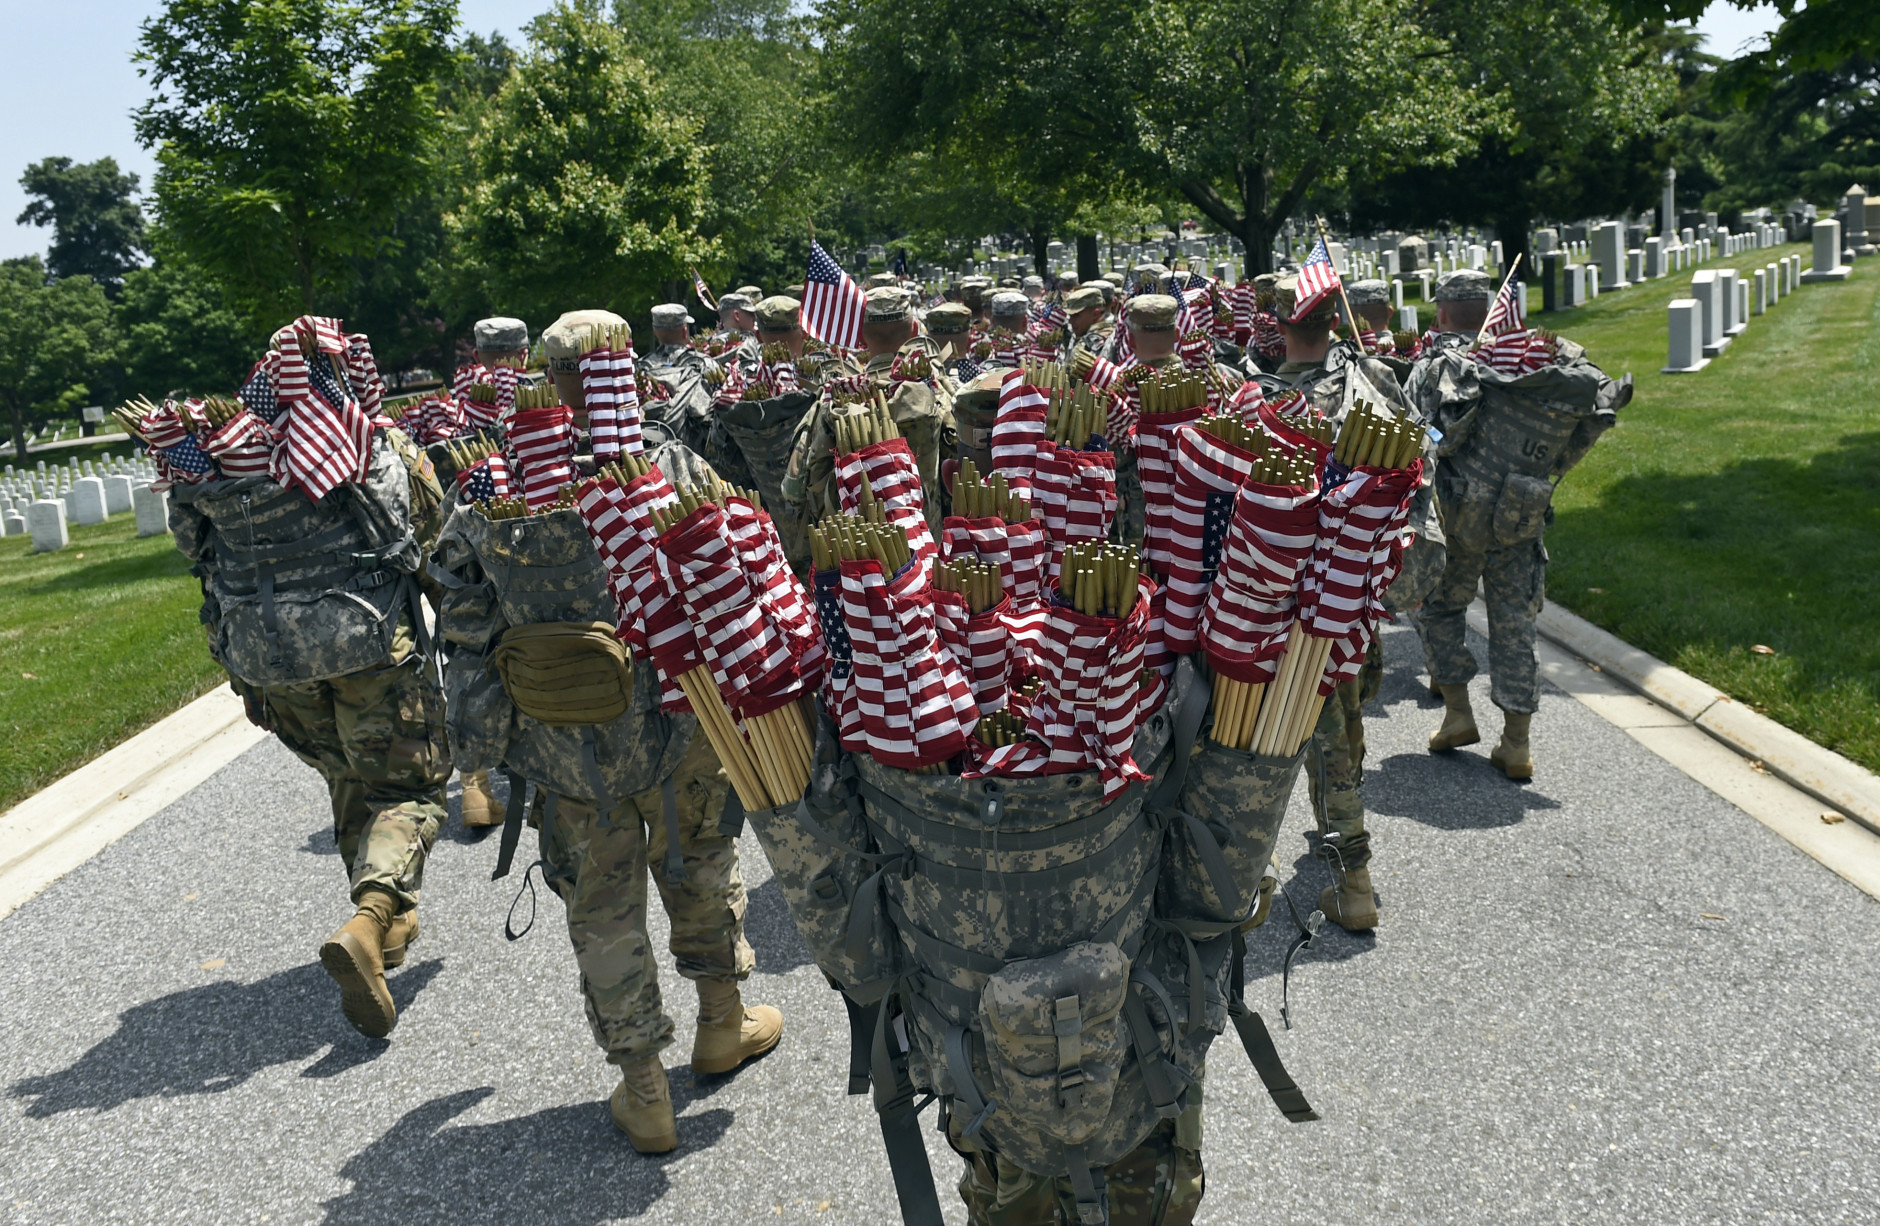 Members of the Old Guard prepare to place flags in front of every headstone at Arlington National Cemetery in Arlington, Va., Thursday, May 26, 2016. Soldiers were to place nearly a quarter of a million U.S. flags at the cemetery as part of a Memorial Day tradition. (AP Photo/Susan Walsh)